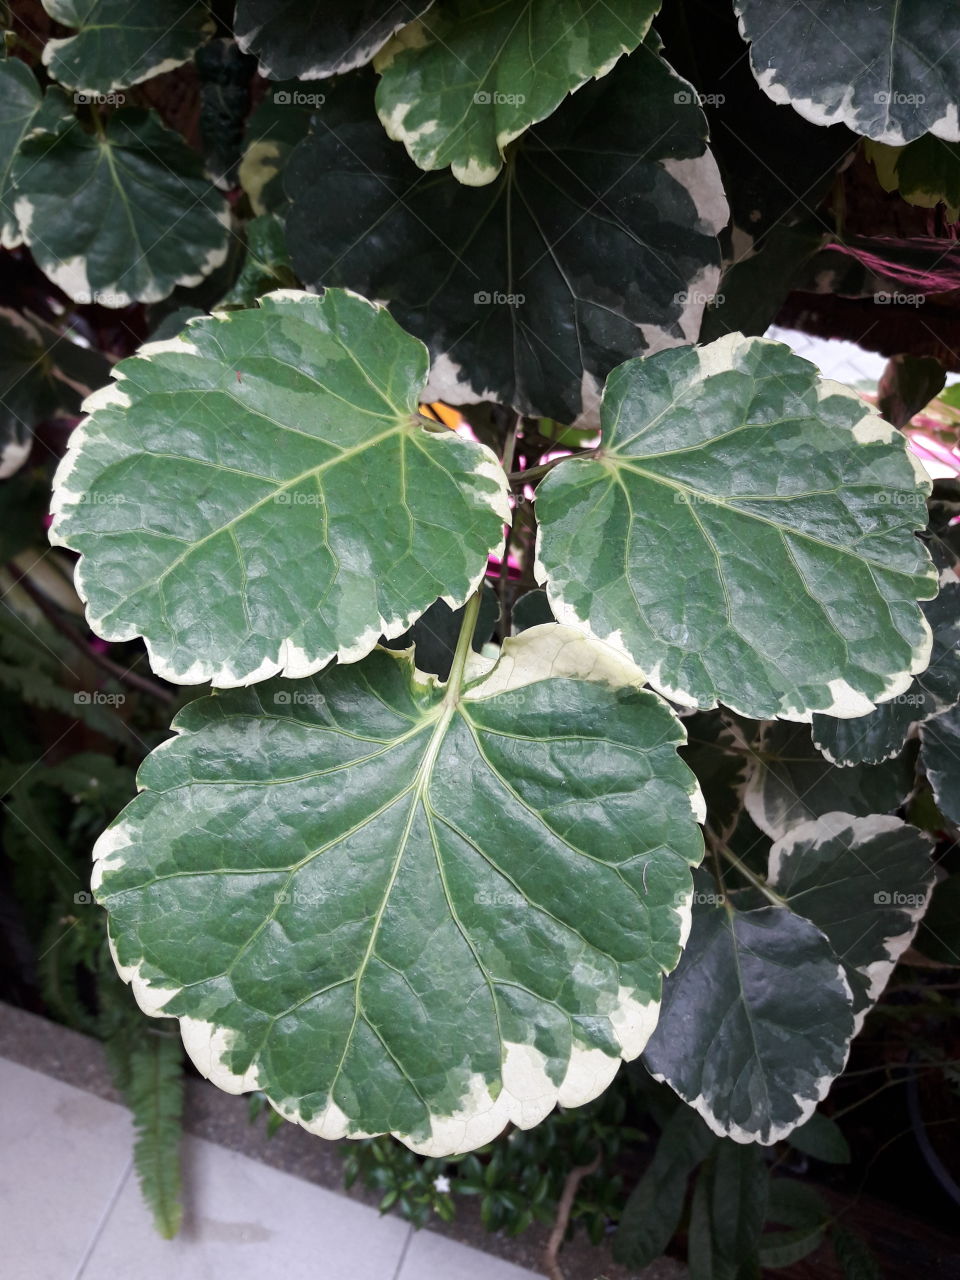 the leafs of polyscias has white color around  the wavy edge. There are many small bulge all over them.